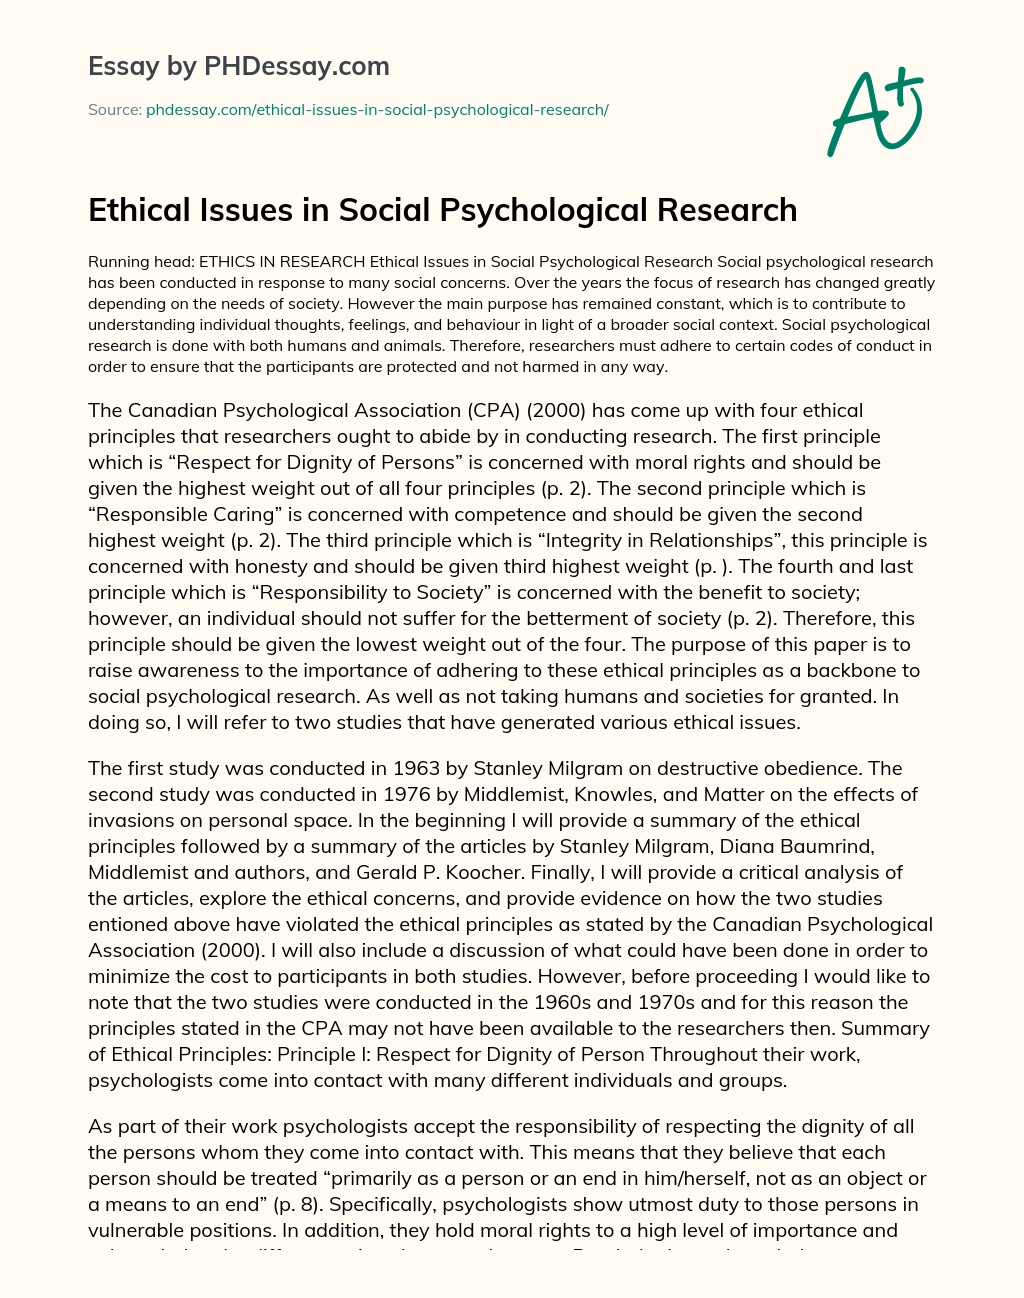 Ethical Issues in Social Psychological Research essay